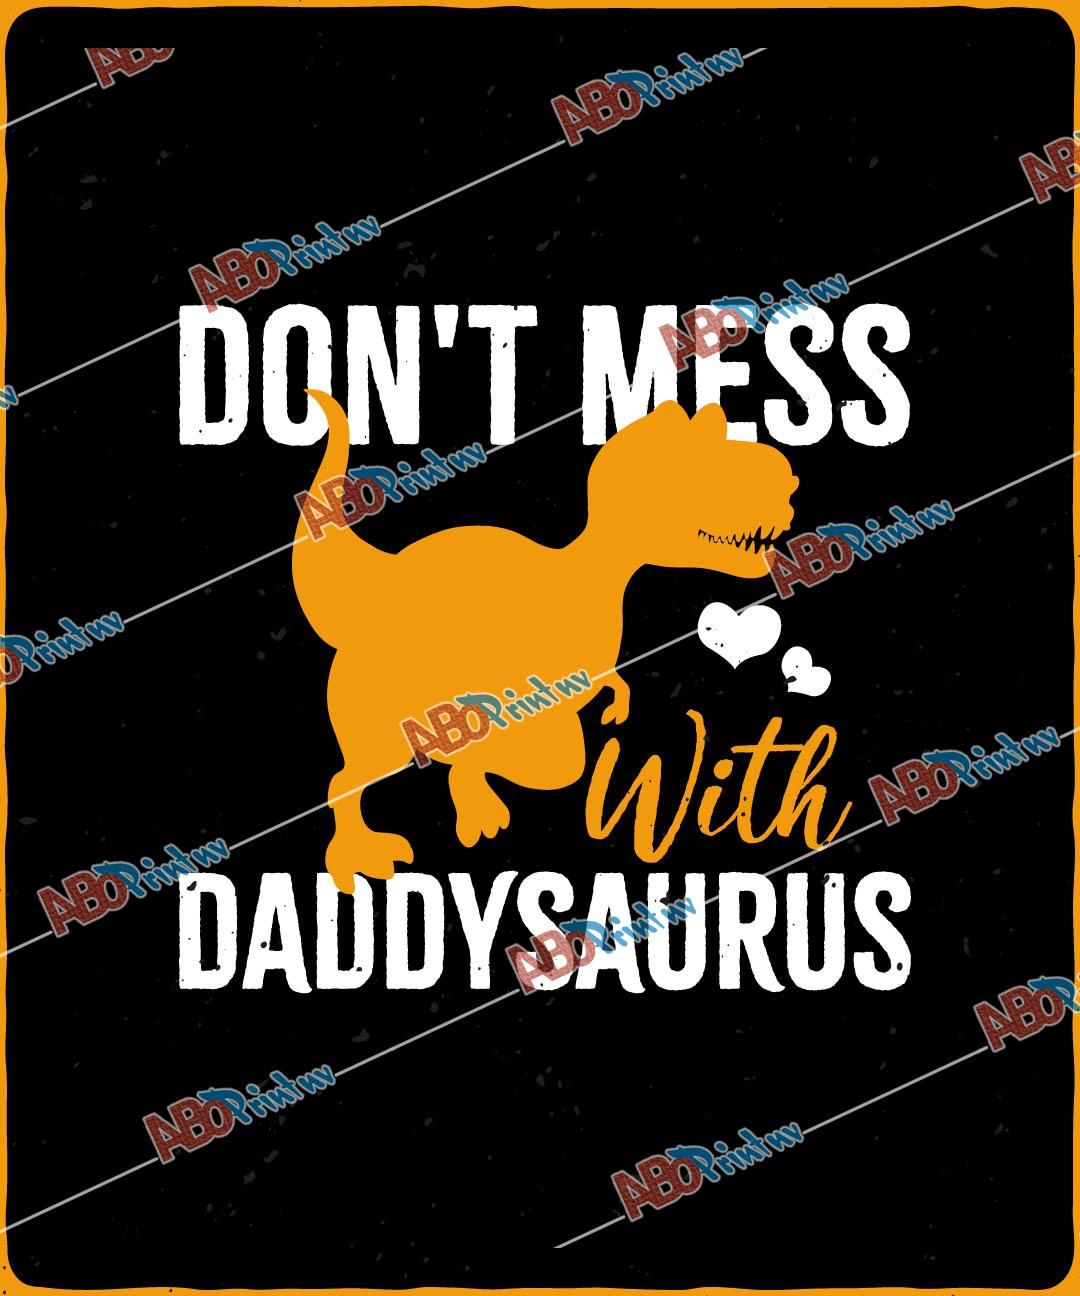 Don't Mess With Daddysaurus.jpg